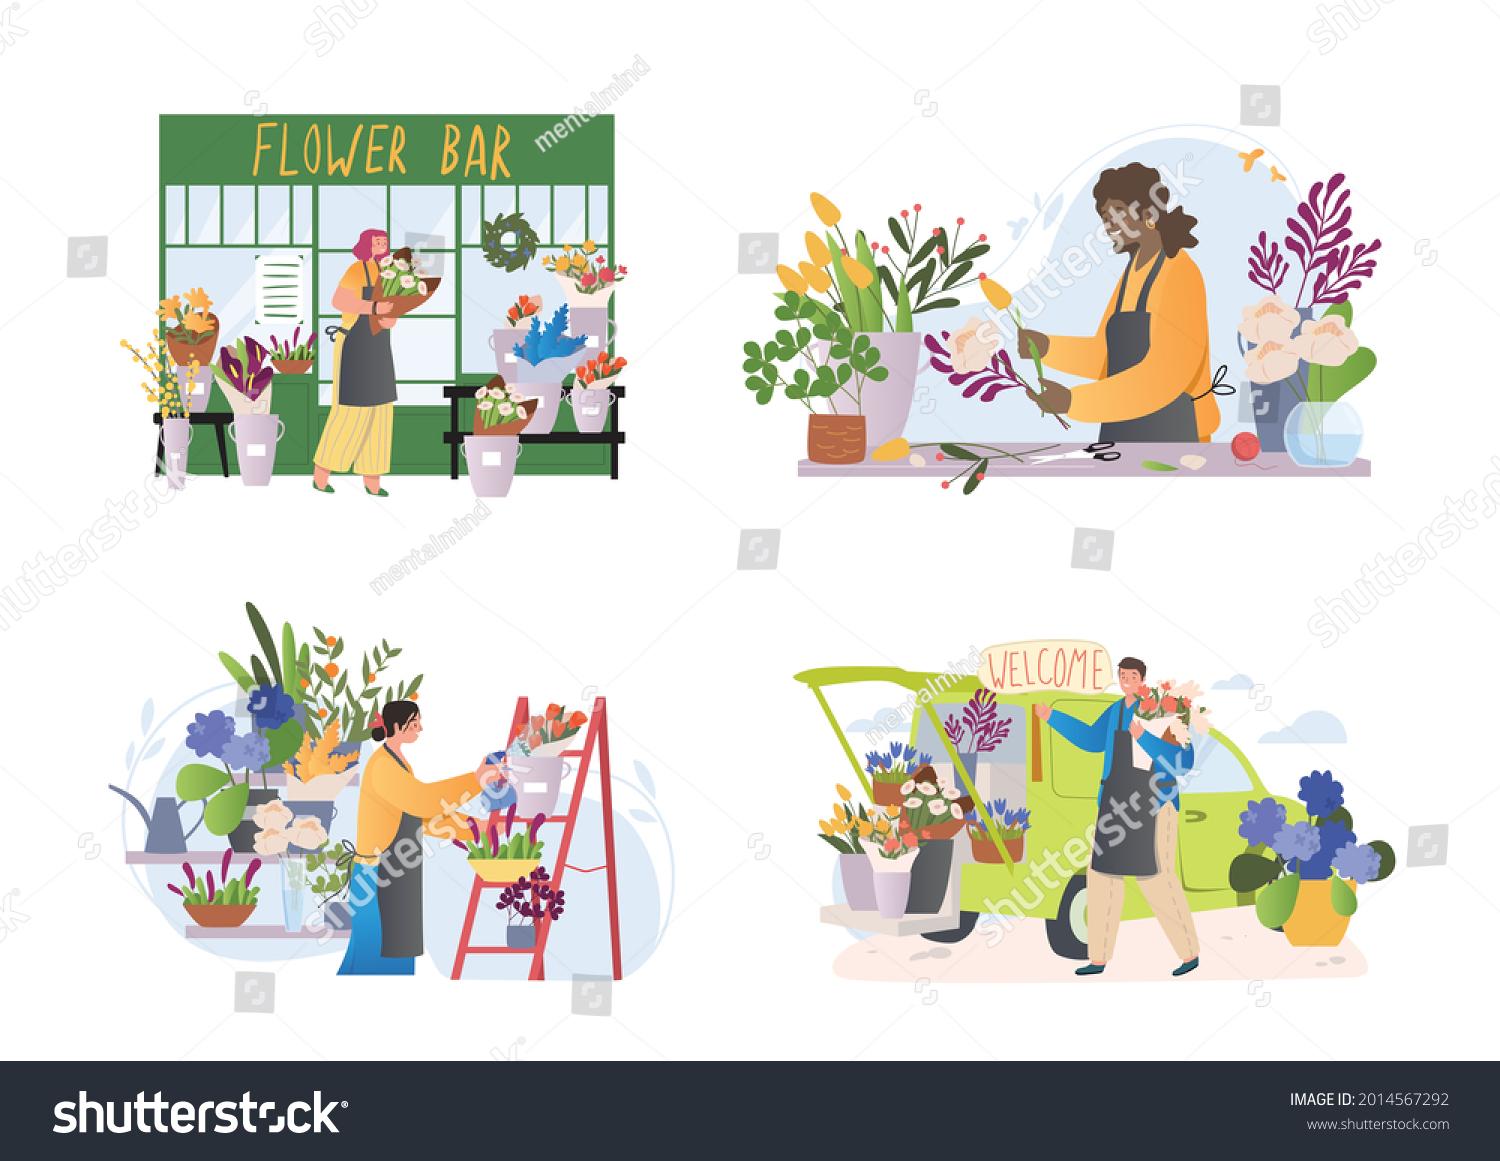 Four different scenes of florists working in shop or nursery arranging bouquets of cut flowers, spraying plants in pots and alongside delivery vehicle. Set of colored flat cartoon vector illustrations #2014567292